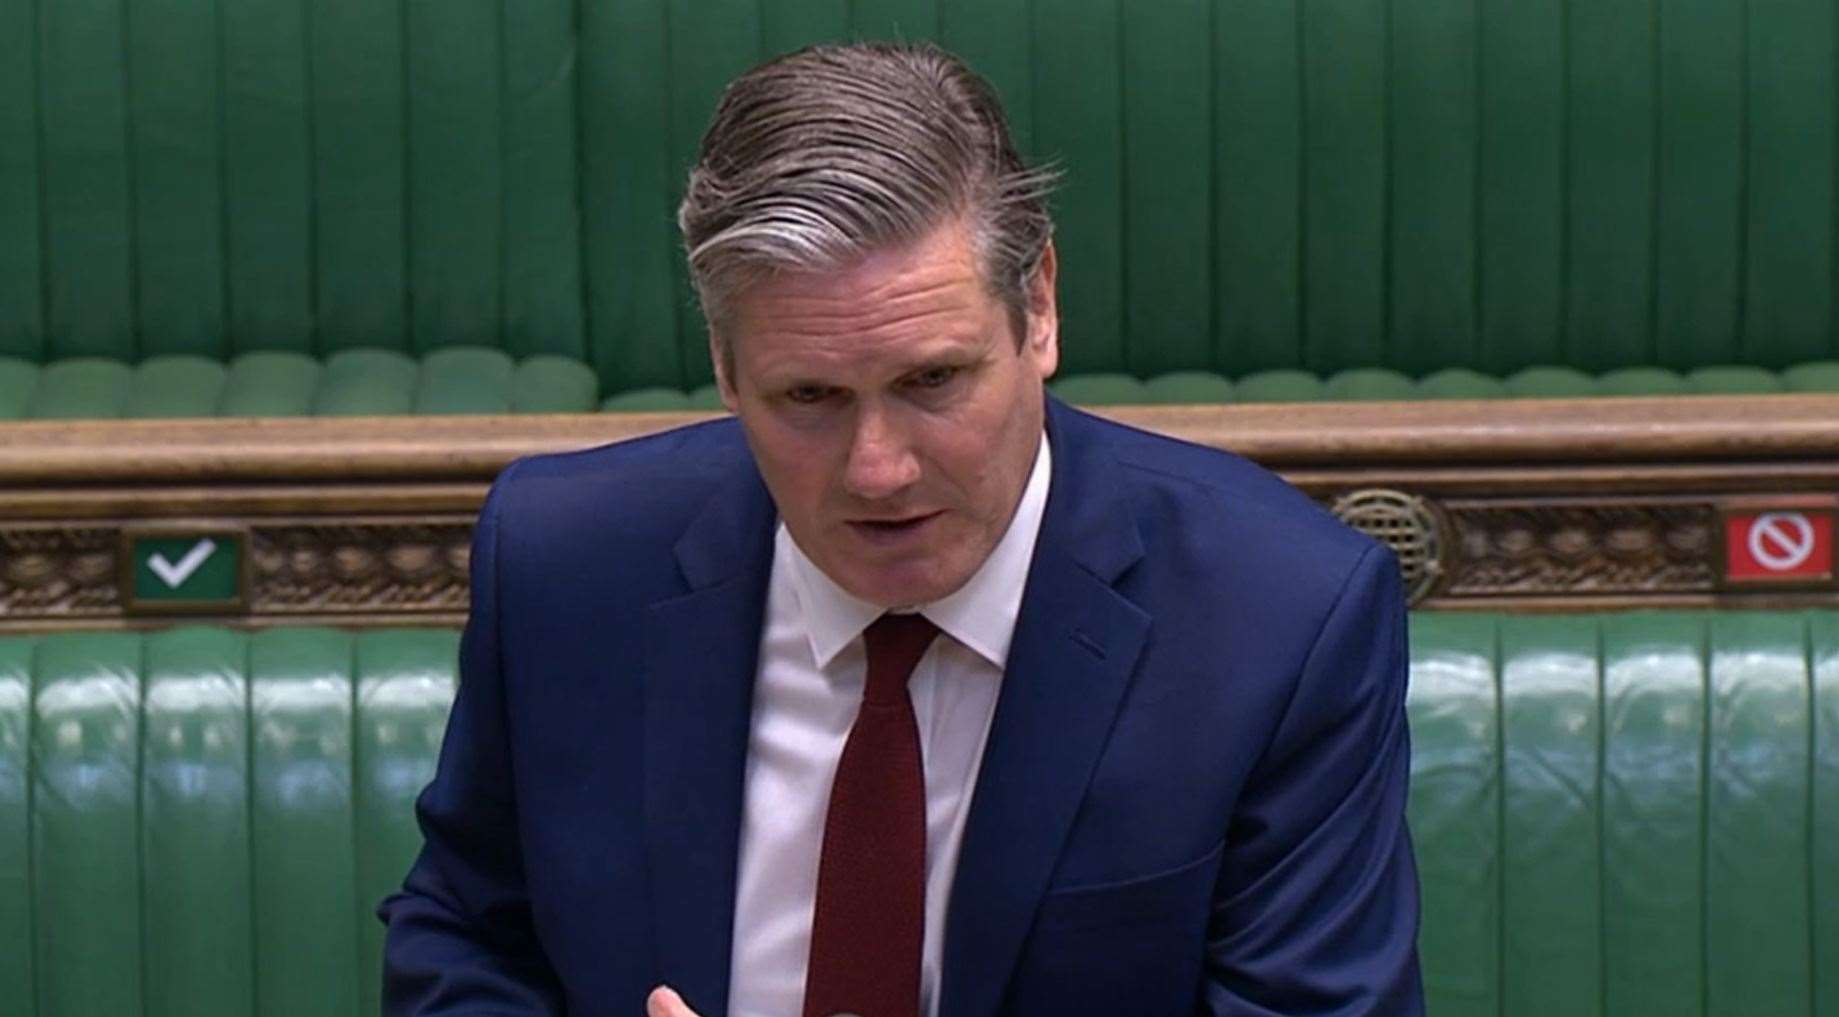 Labour leader Keir Starmer has been critical of the Government’s handling of reopening schools (Commons/PA)